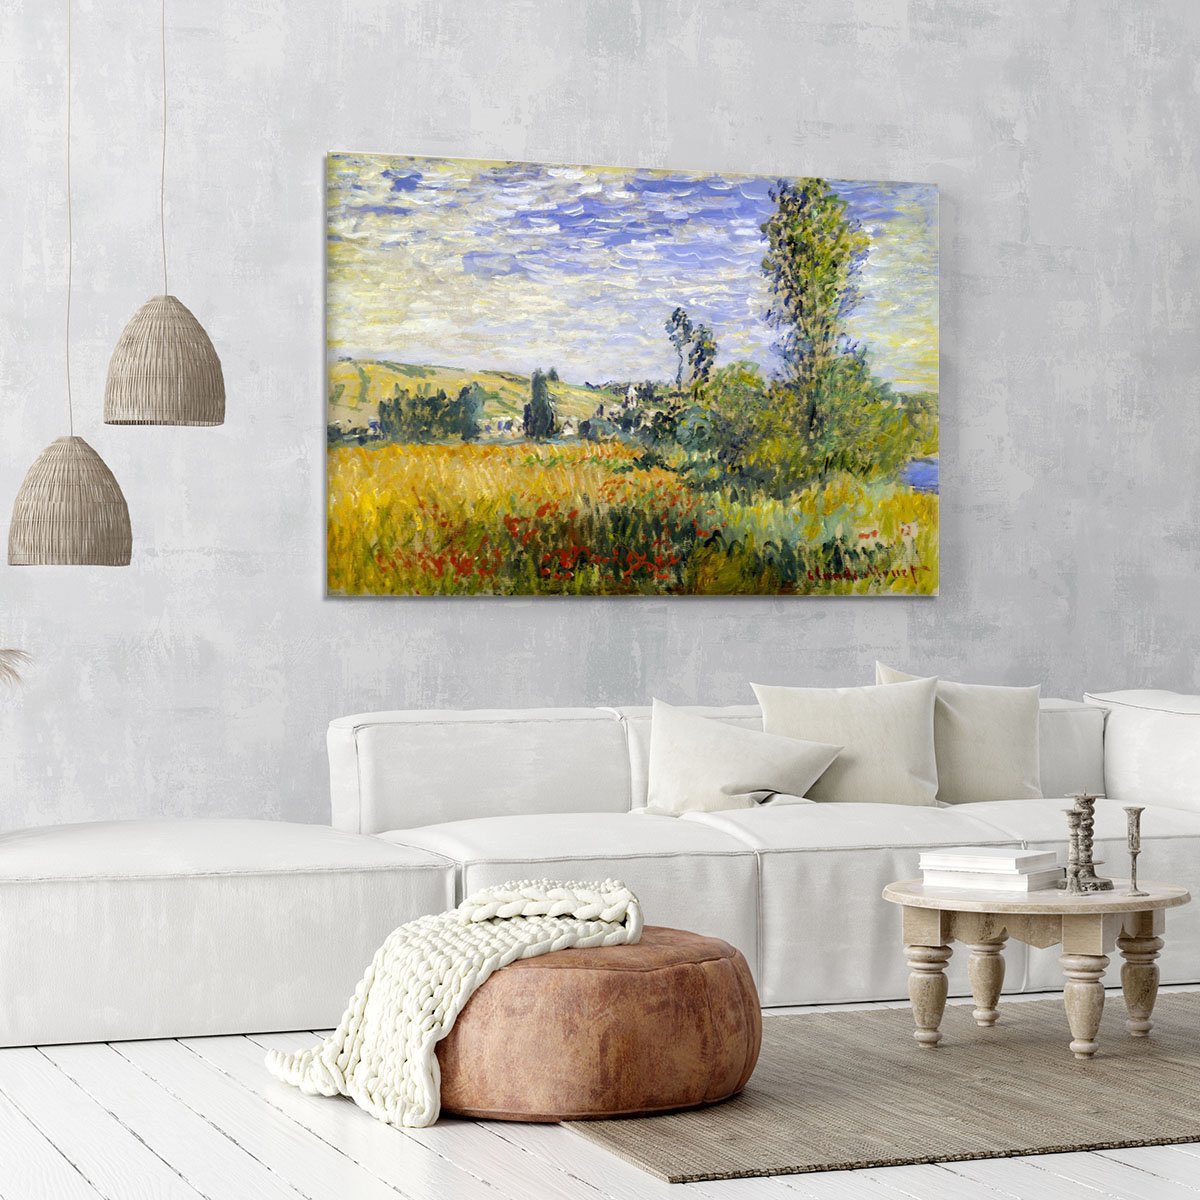 Vetheuil by Monet Canvas Print or Poster